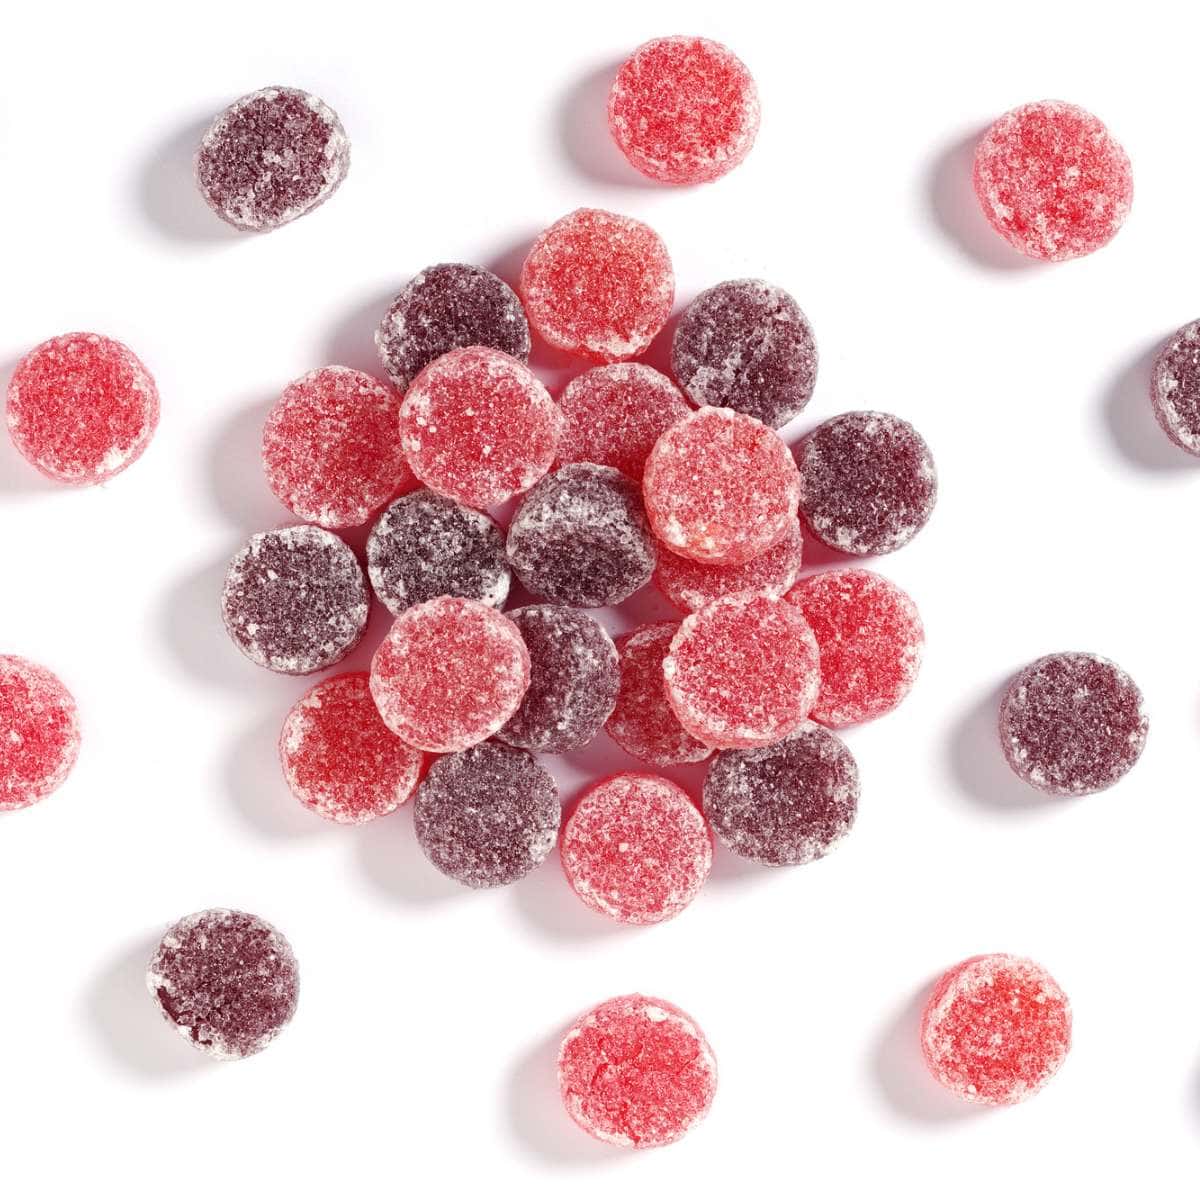 A pile of red and pink British gummy candies on a white surface.